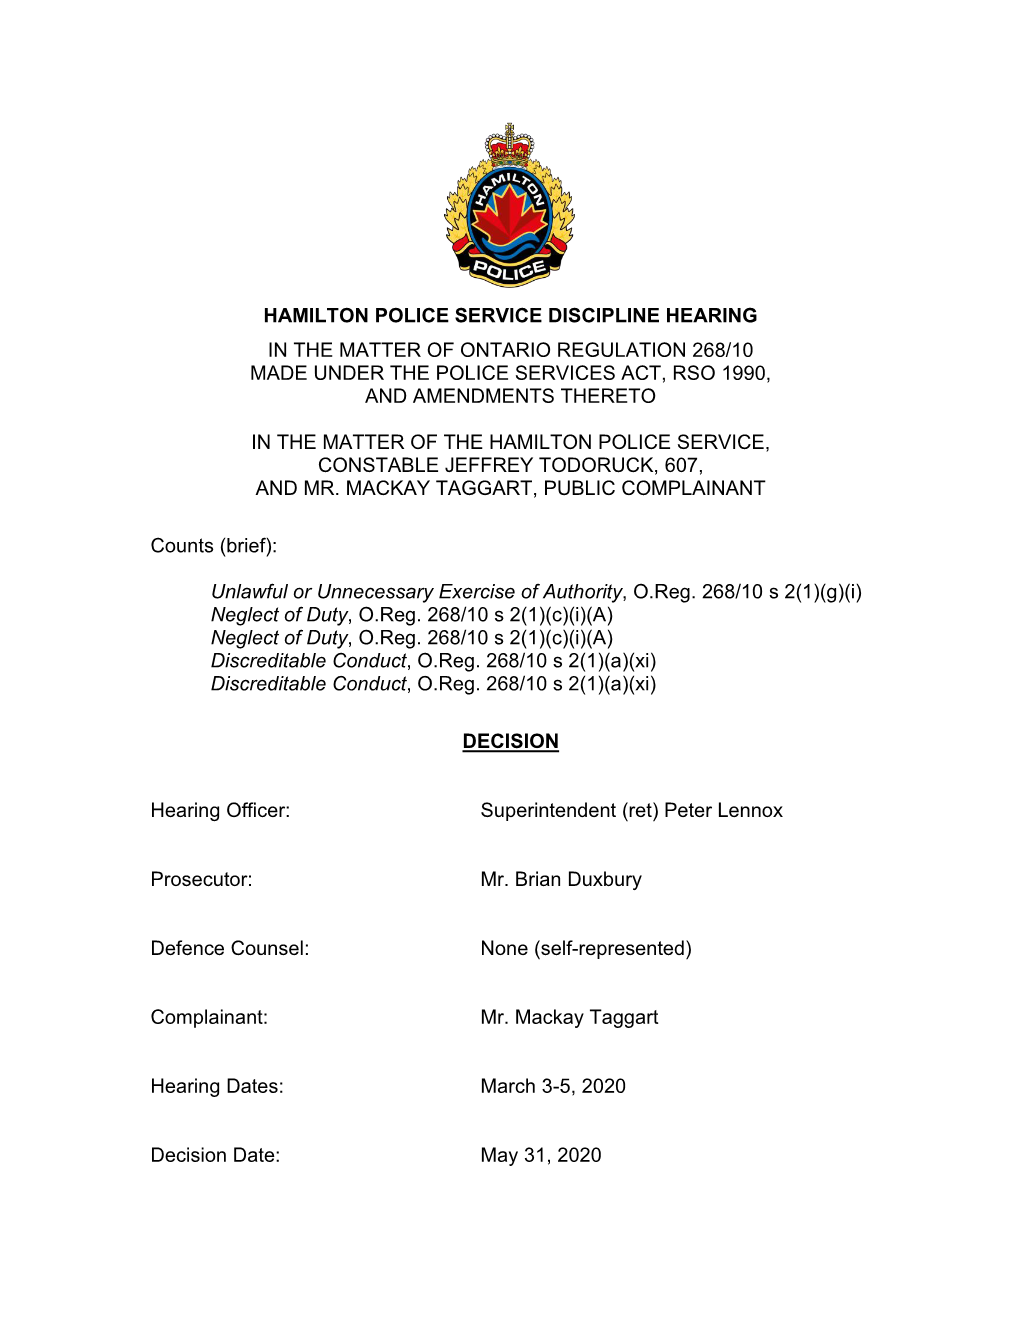 Hamilton Police Service Discipline Hearing in the Matter of Ontario Regulation 268/10 Made Under the Police Services Act, Rso 1990, and Amendments Thereto